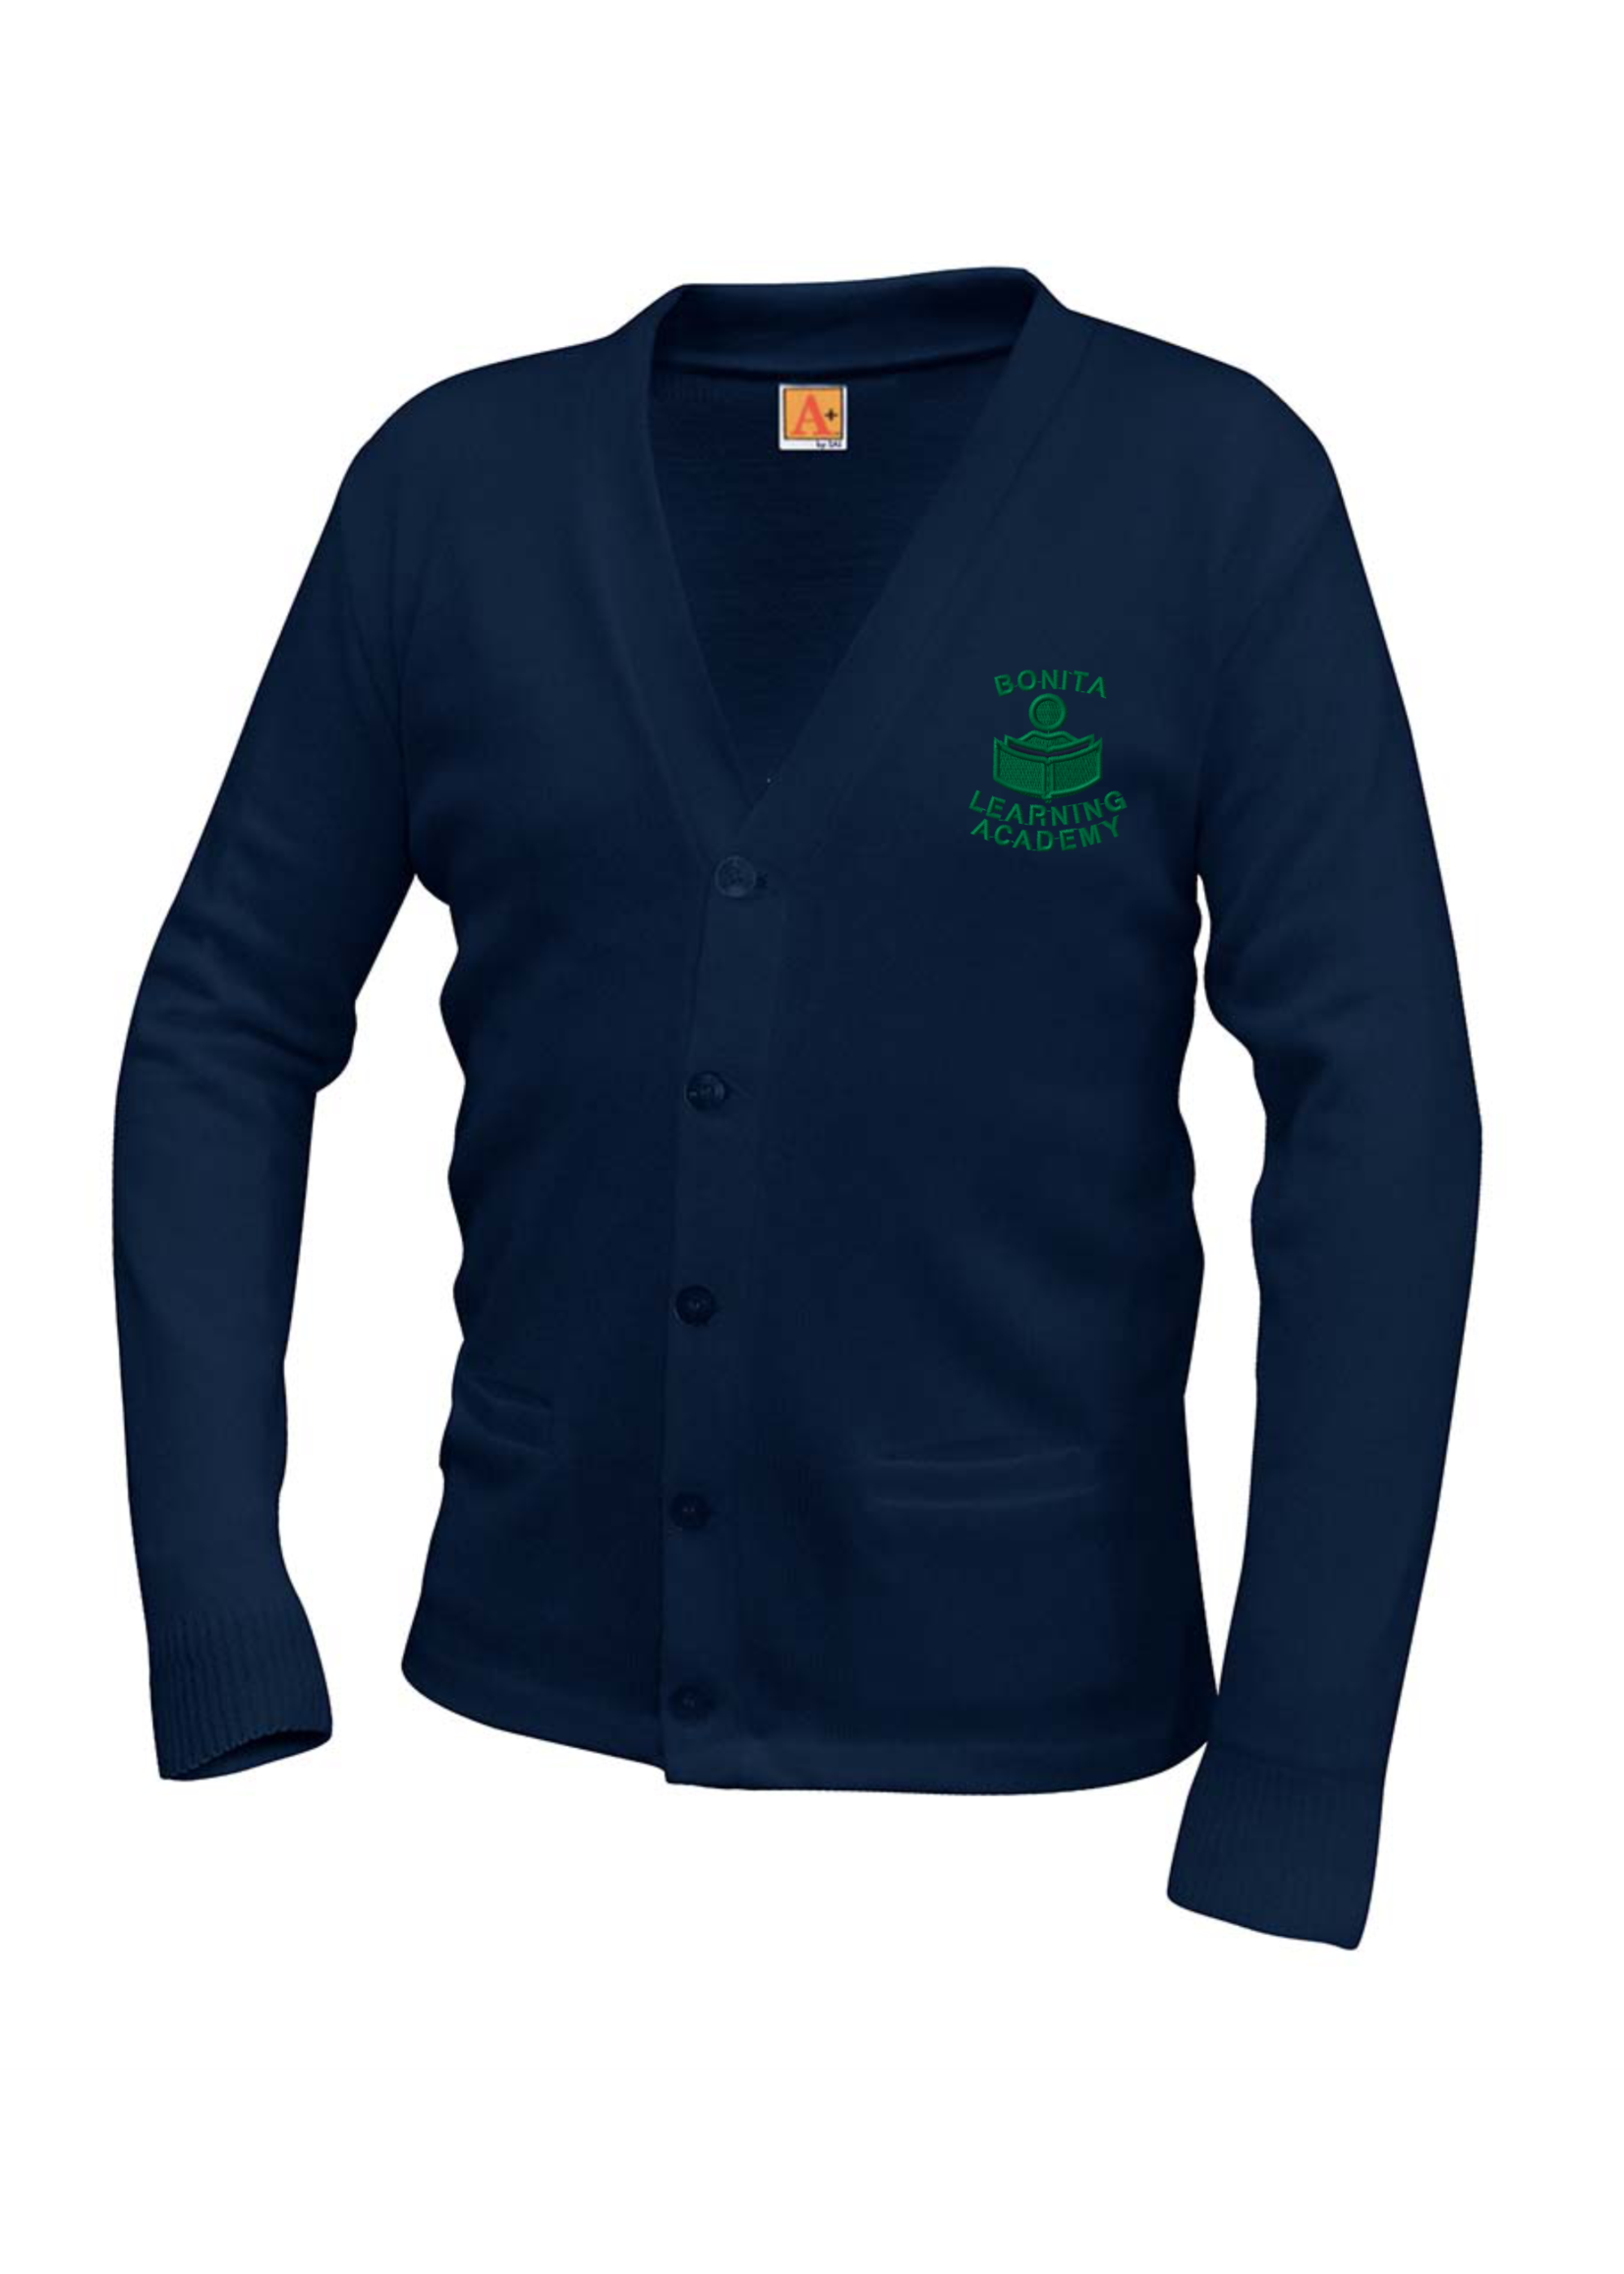 BLA Navy Cardigan V-neck with pocket (Required)